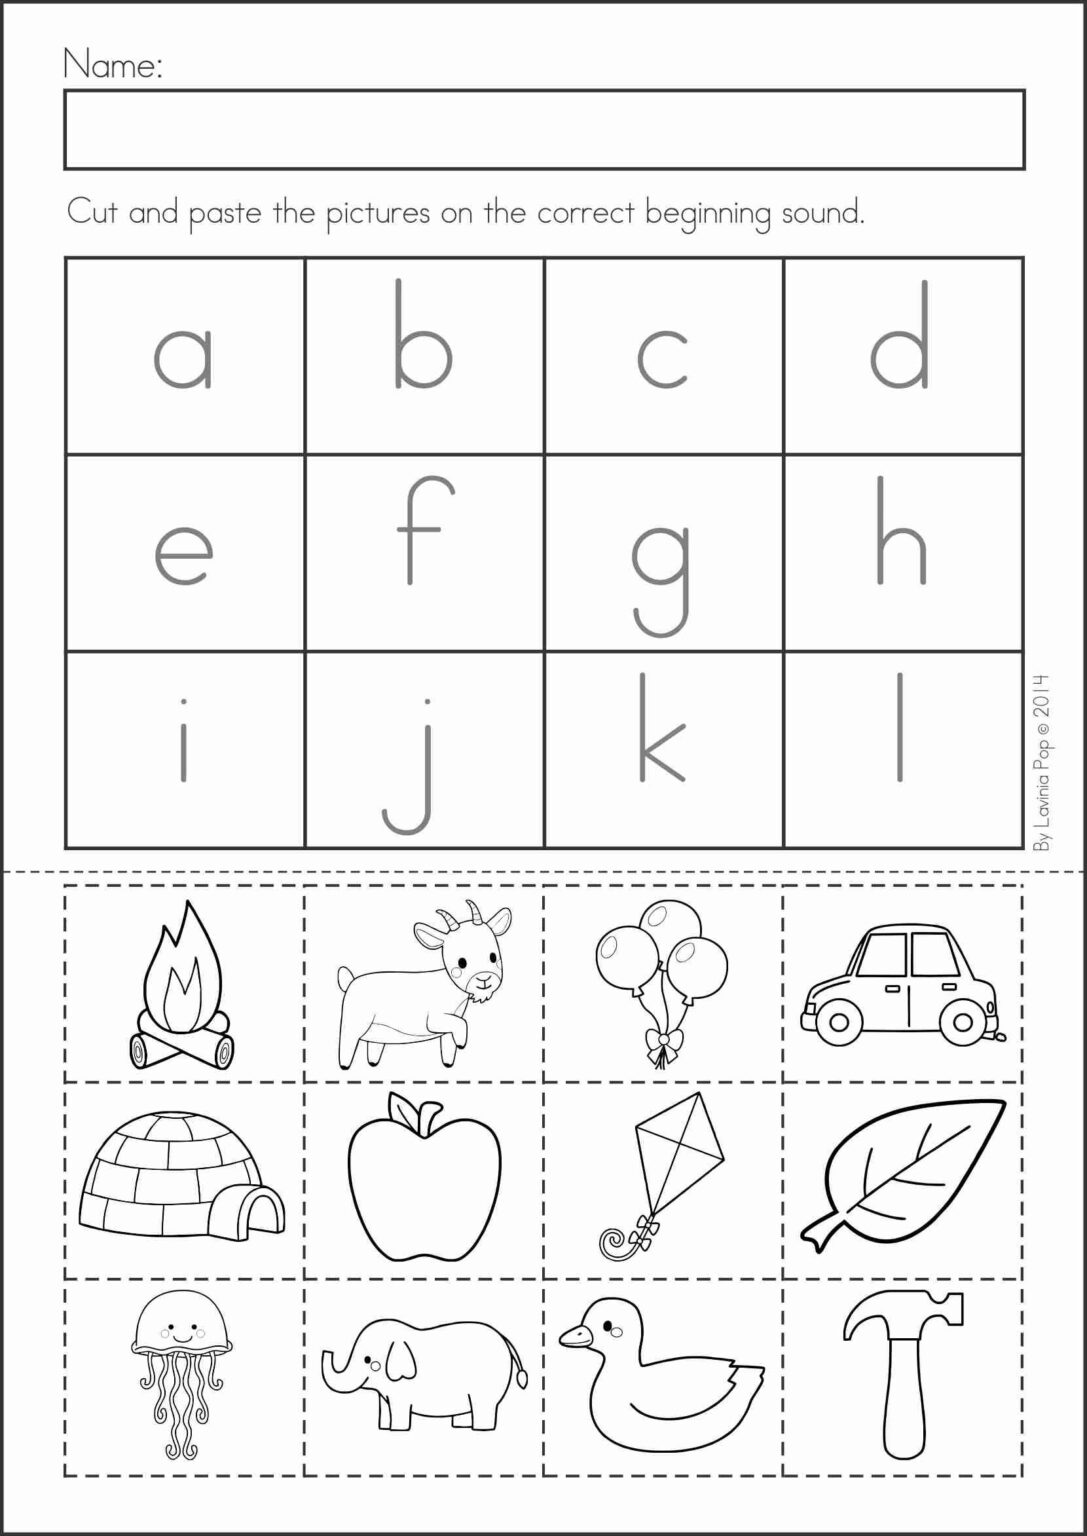 free-printable-cut-and-paste-worksheets-for-second-grade-printable-worksheets